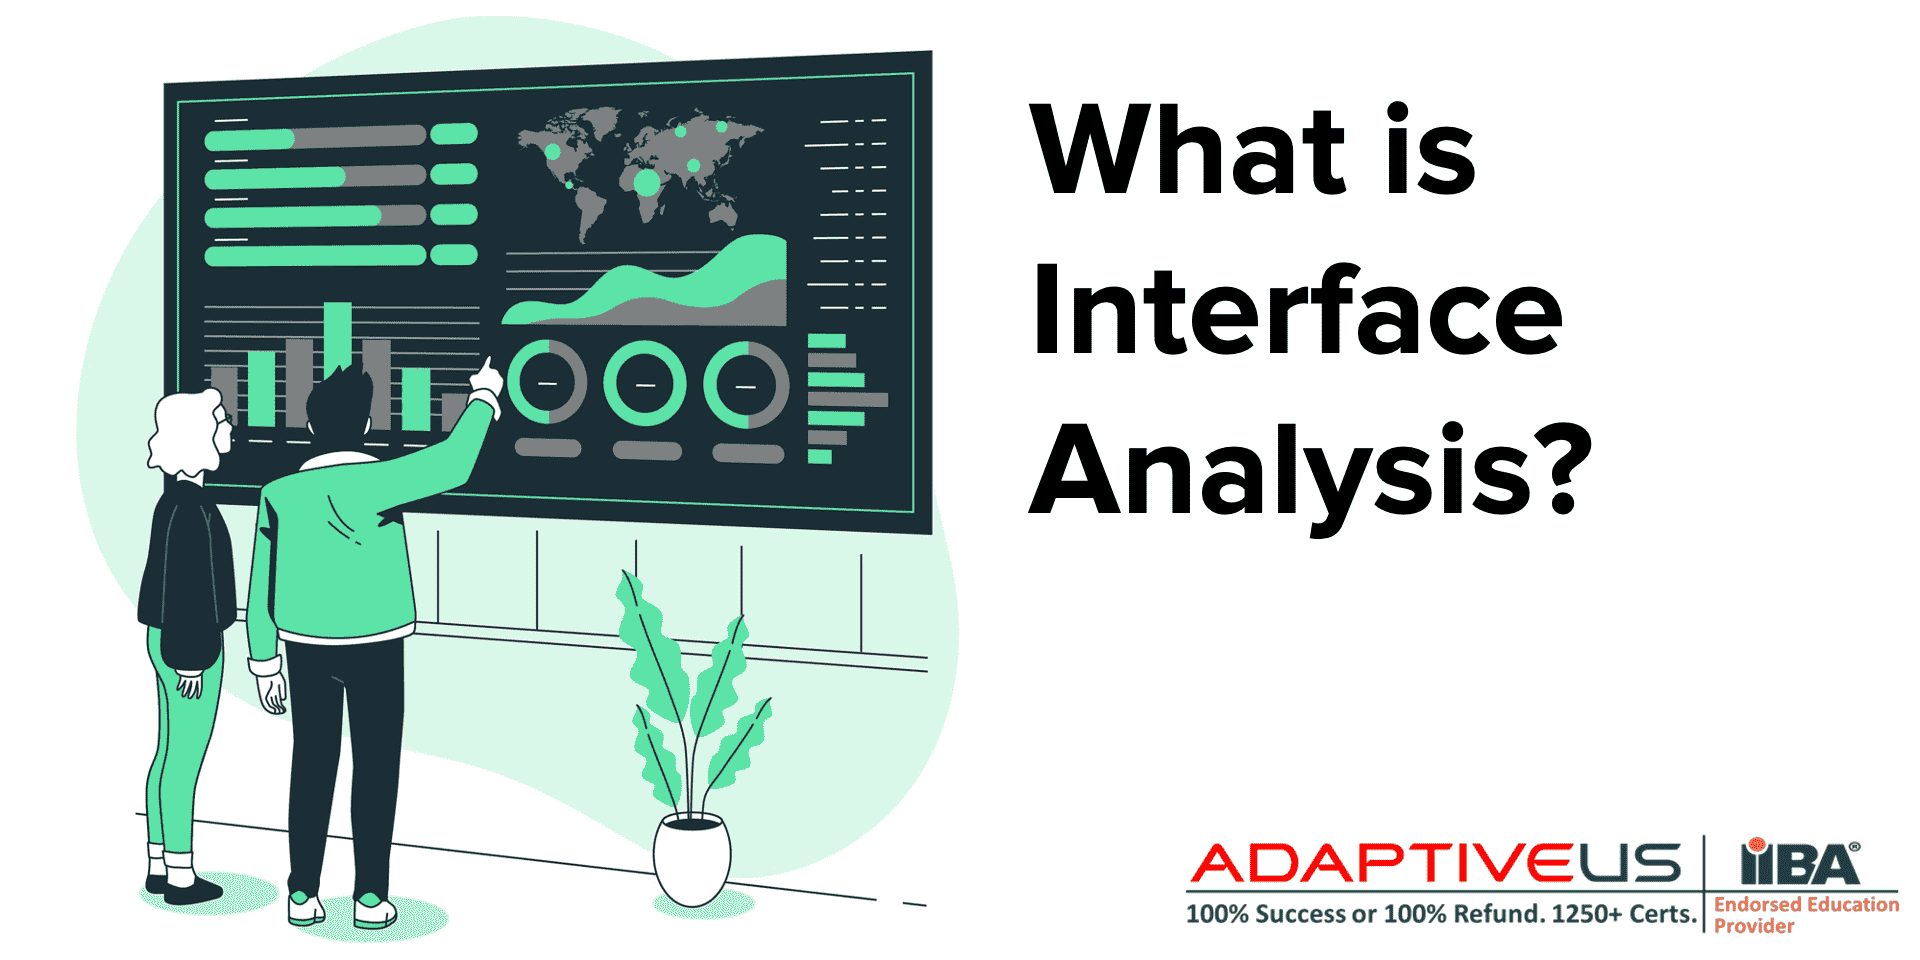 What is Interface Analysis